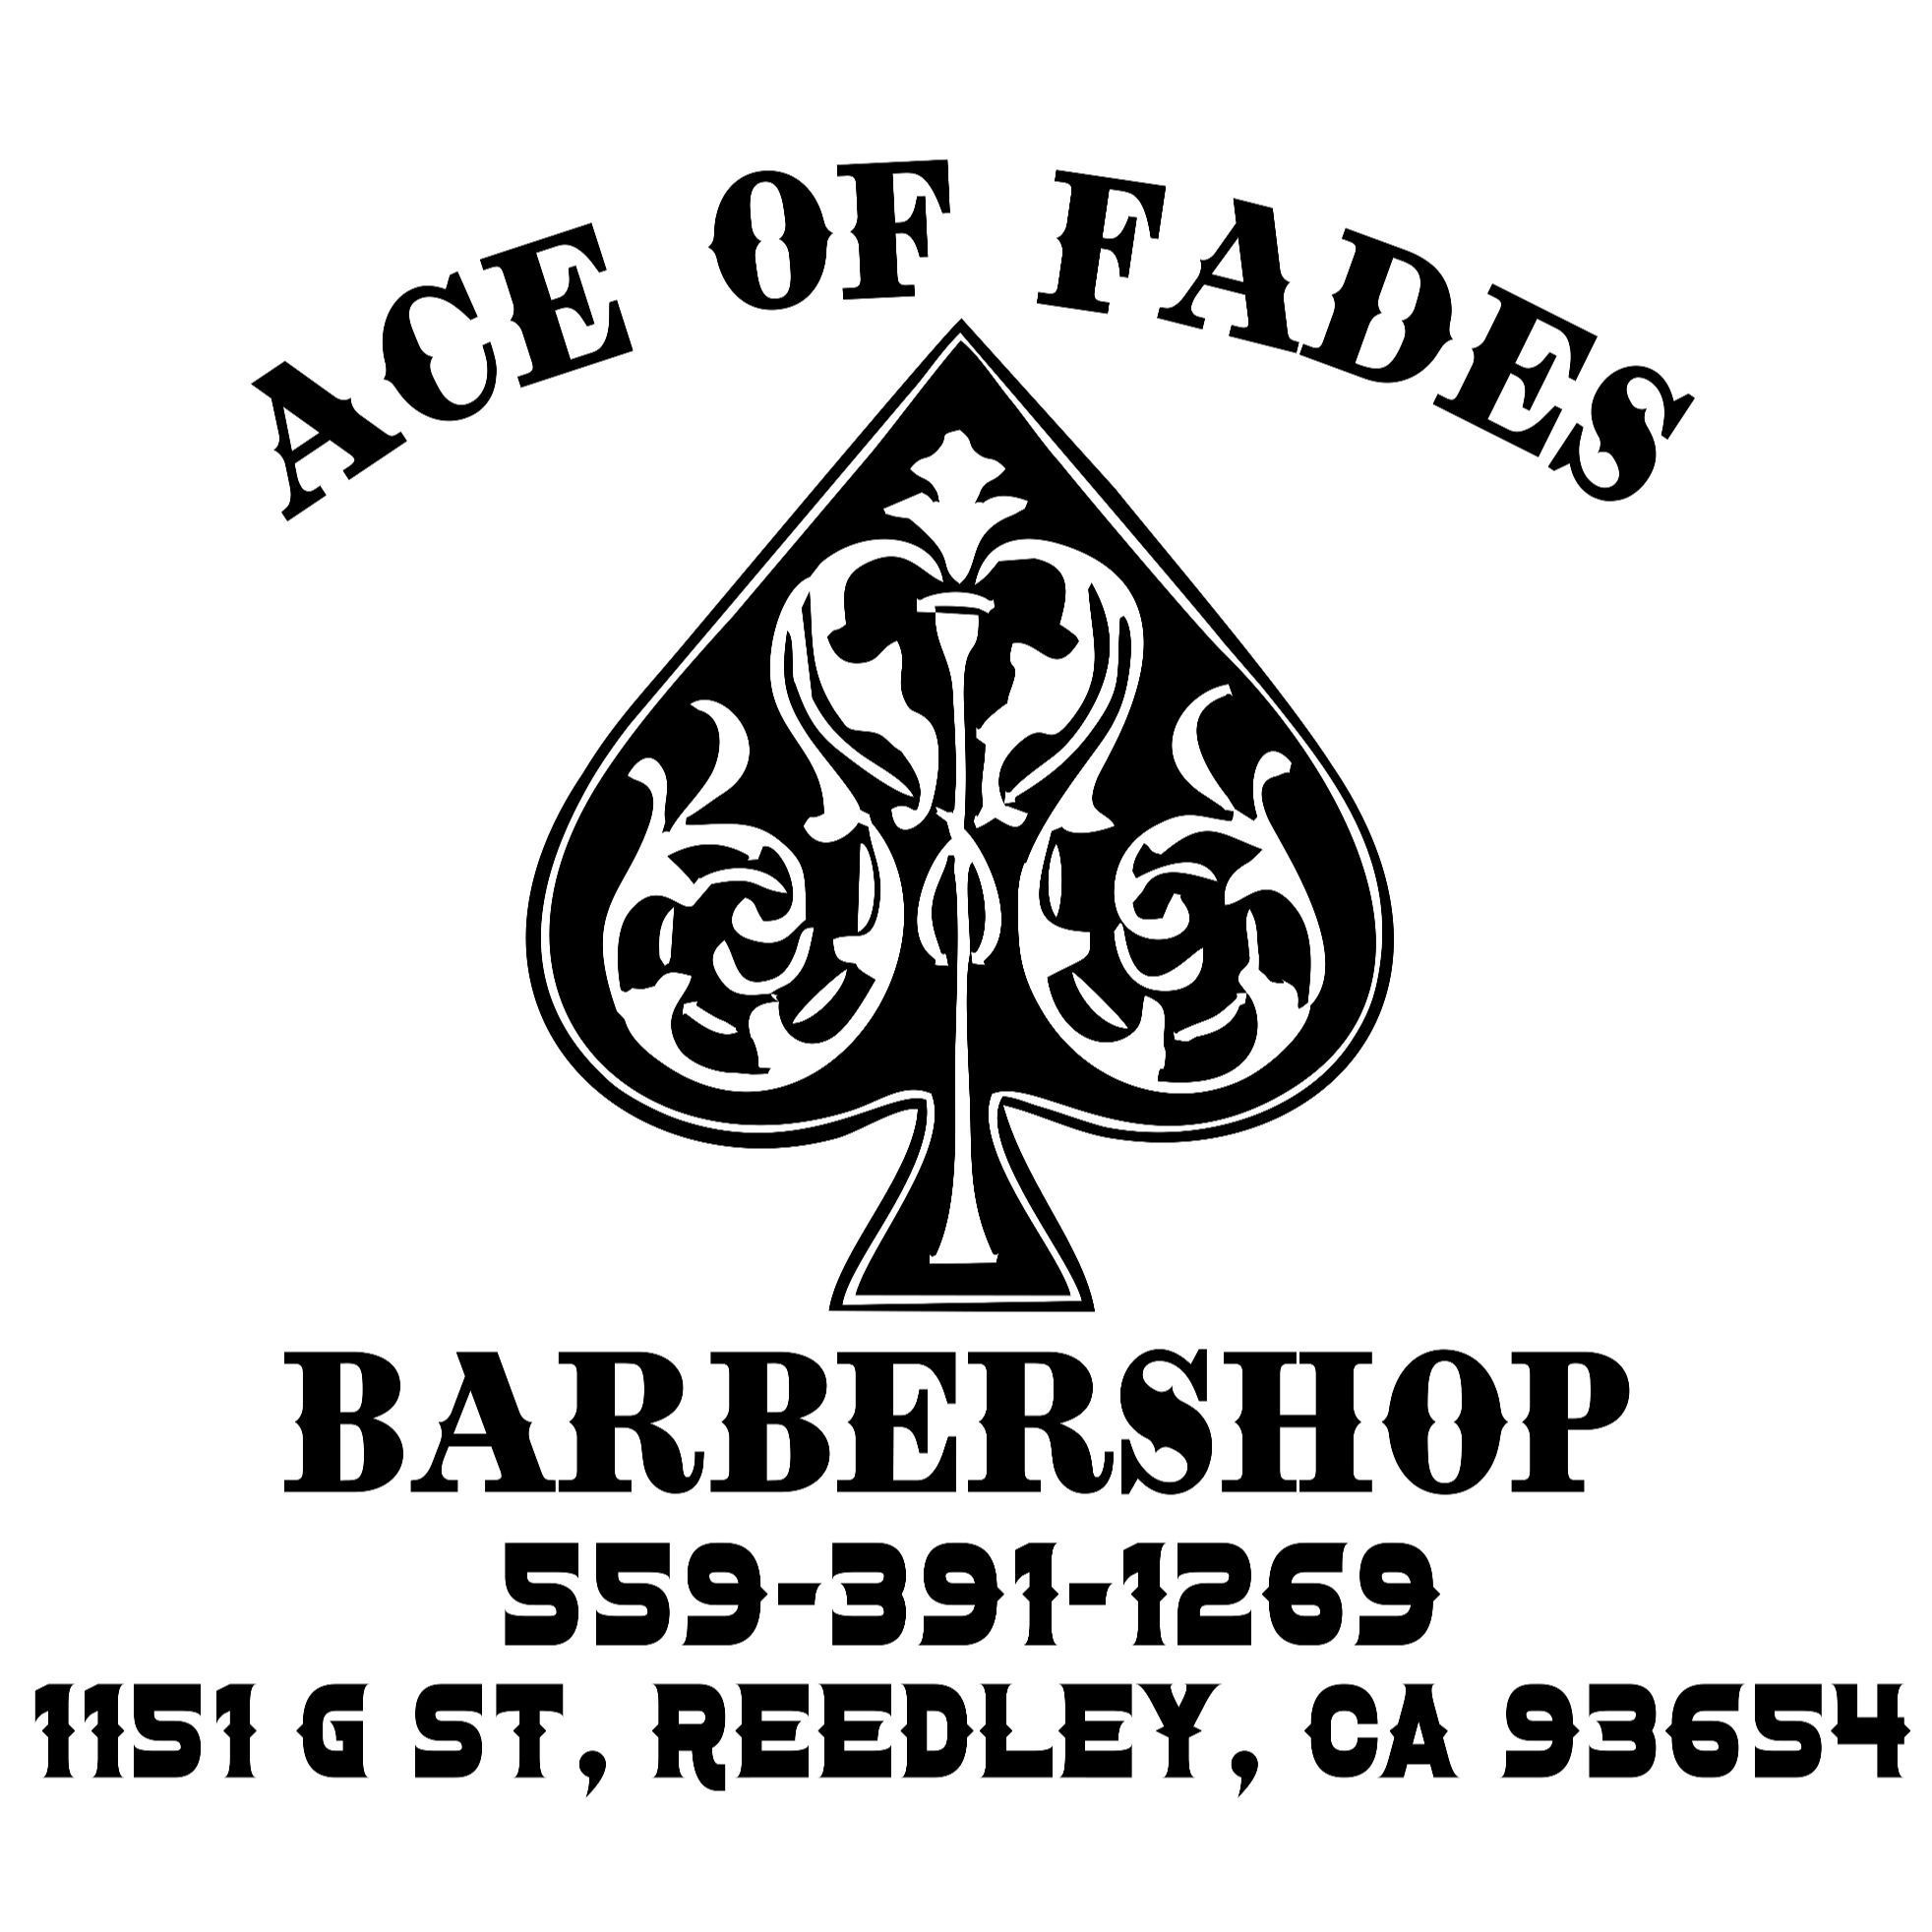 Ace Of Fades, 1135 G st, Reedley, 93654